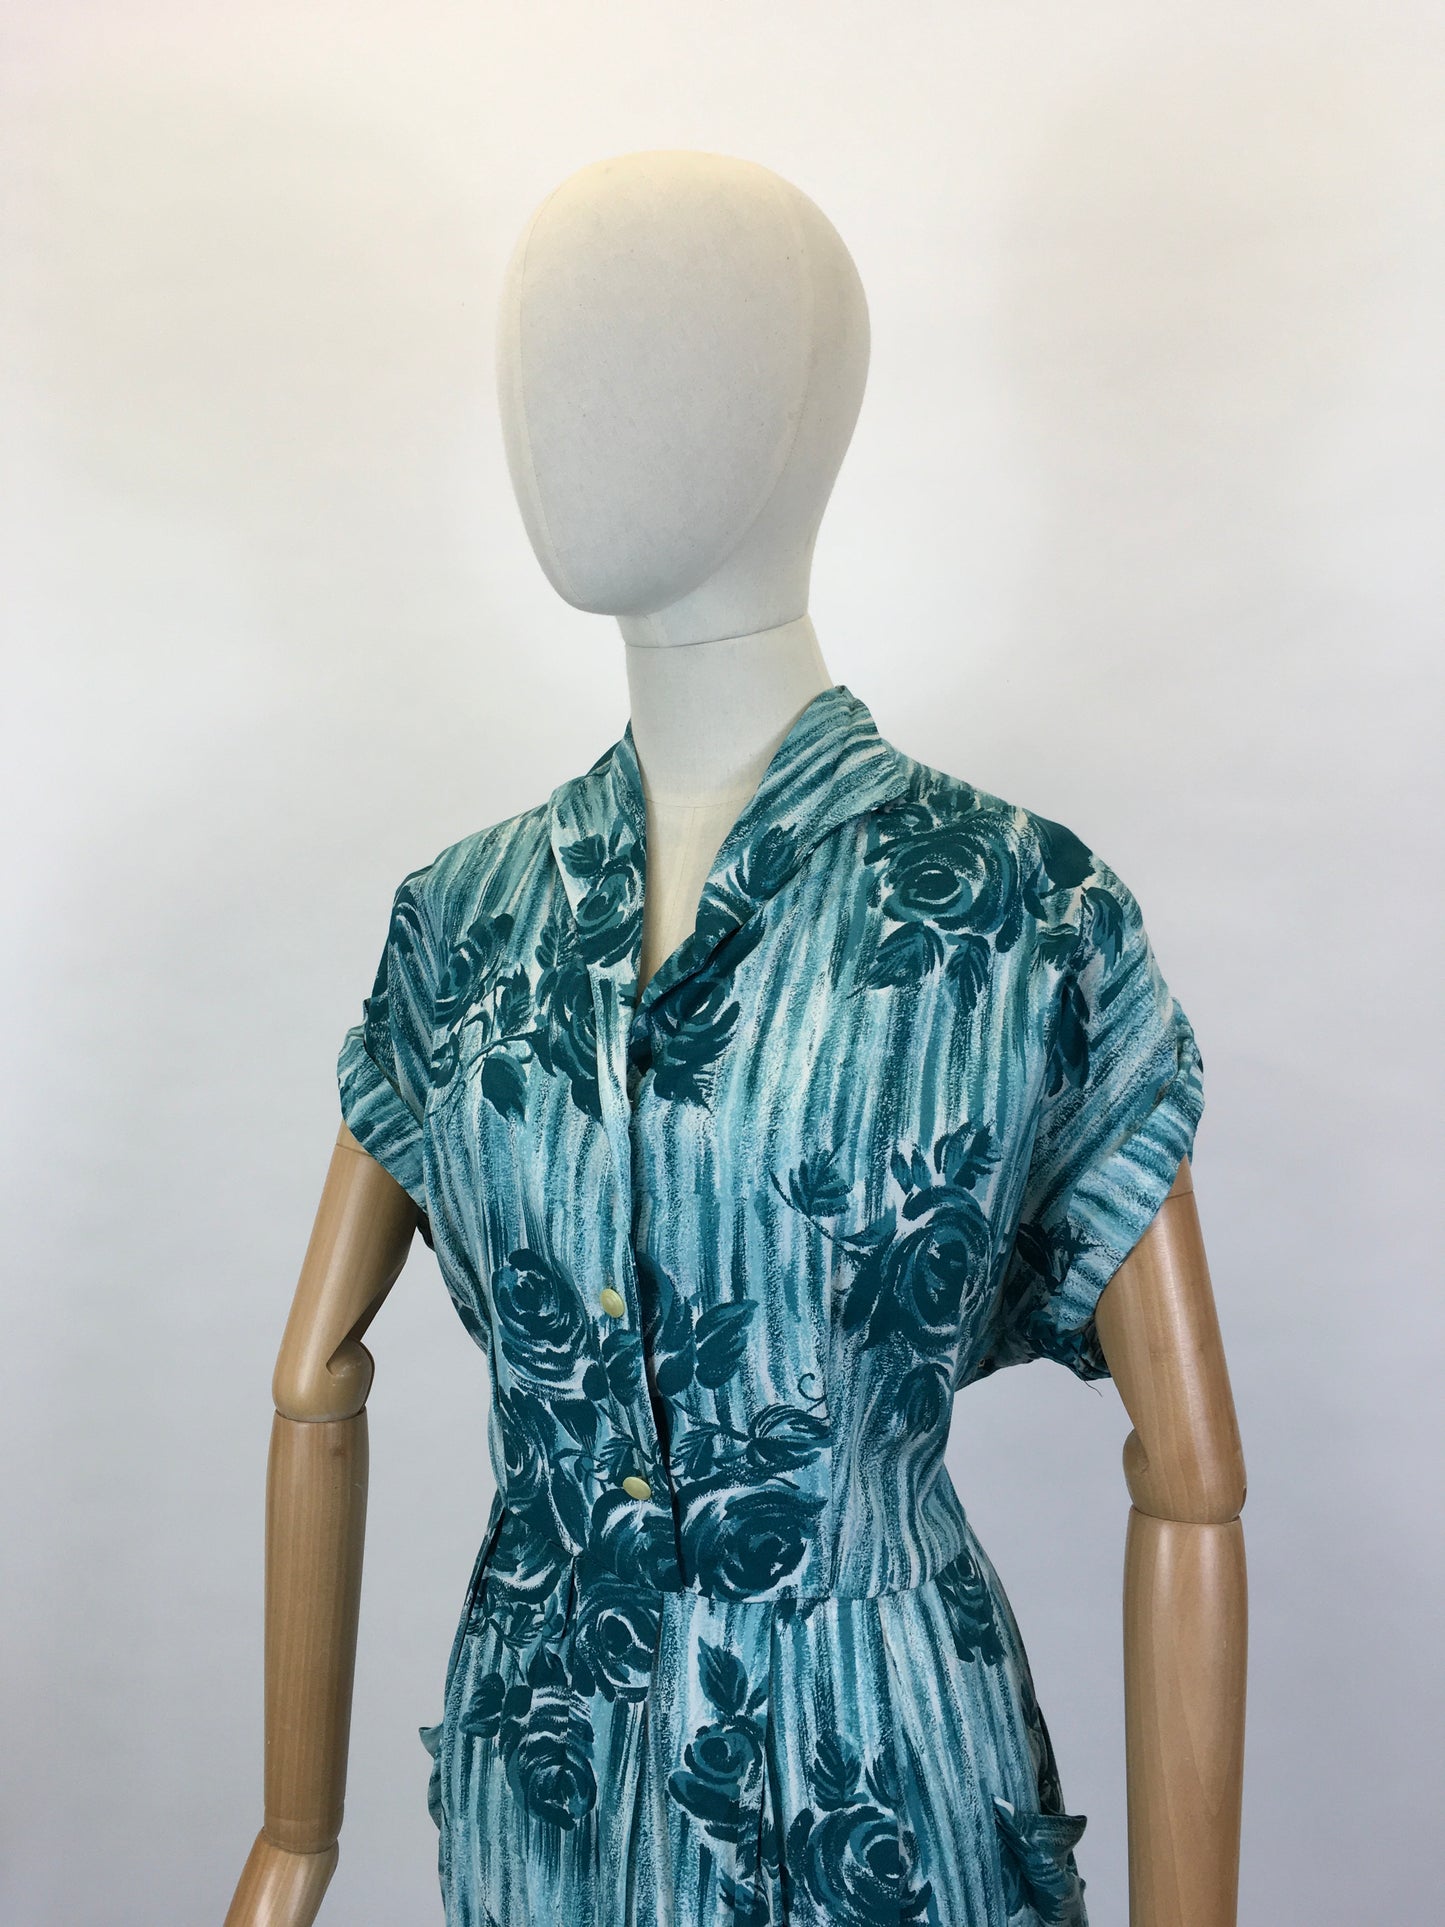 Original 1950’s VOLUP Cotton Day Dress - In A Lovely Rich Teal Colour Floral